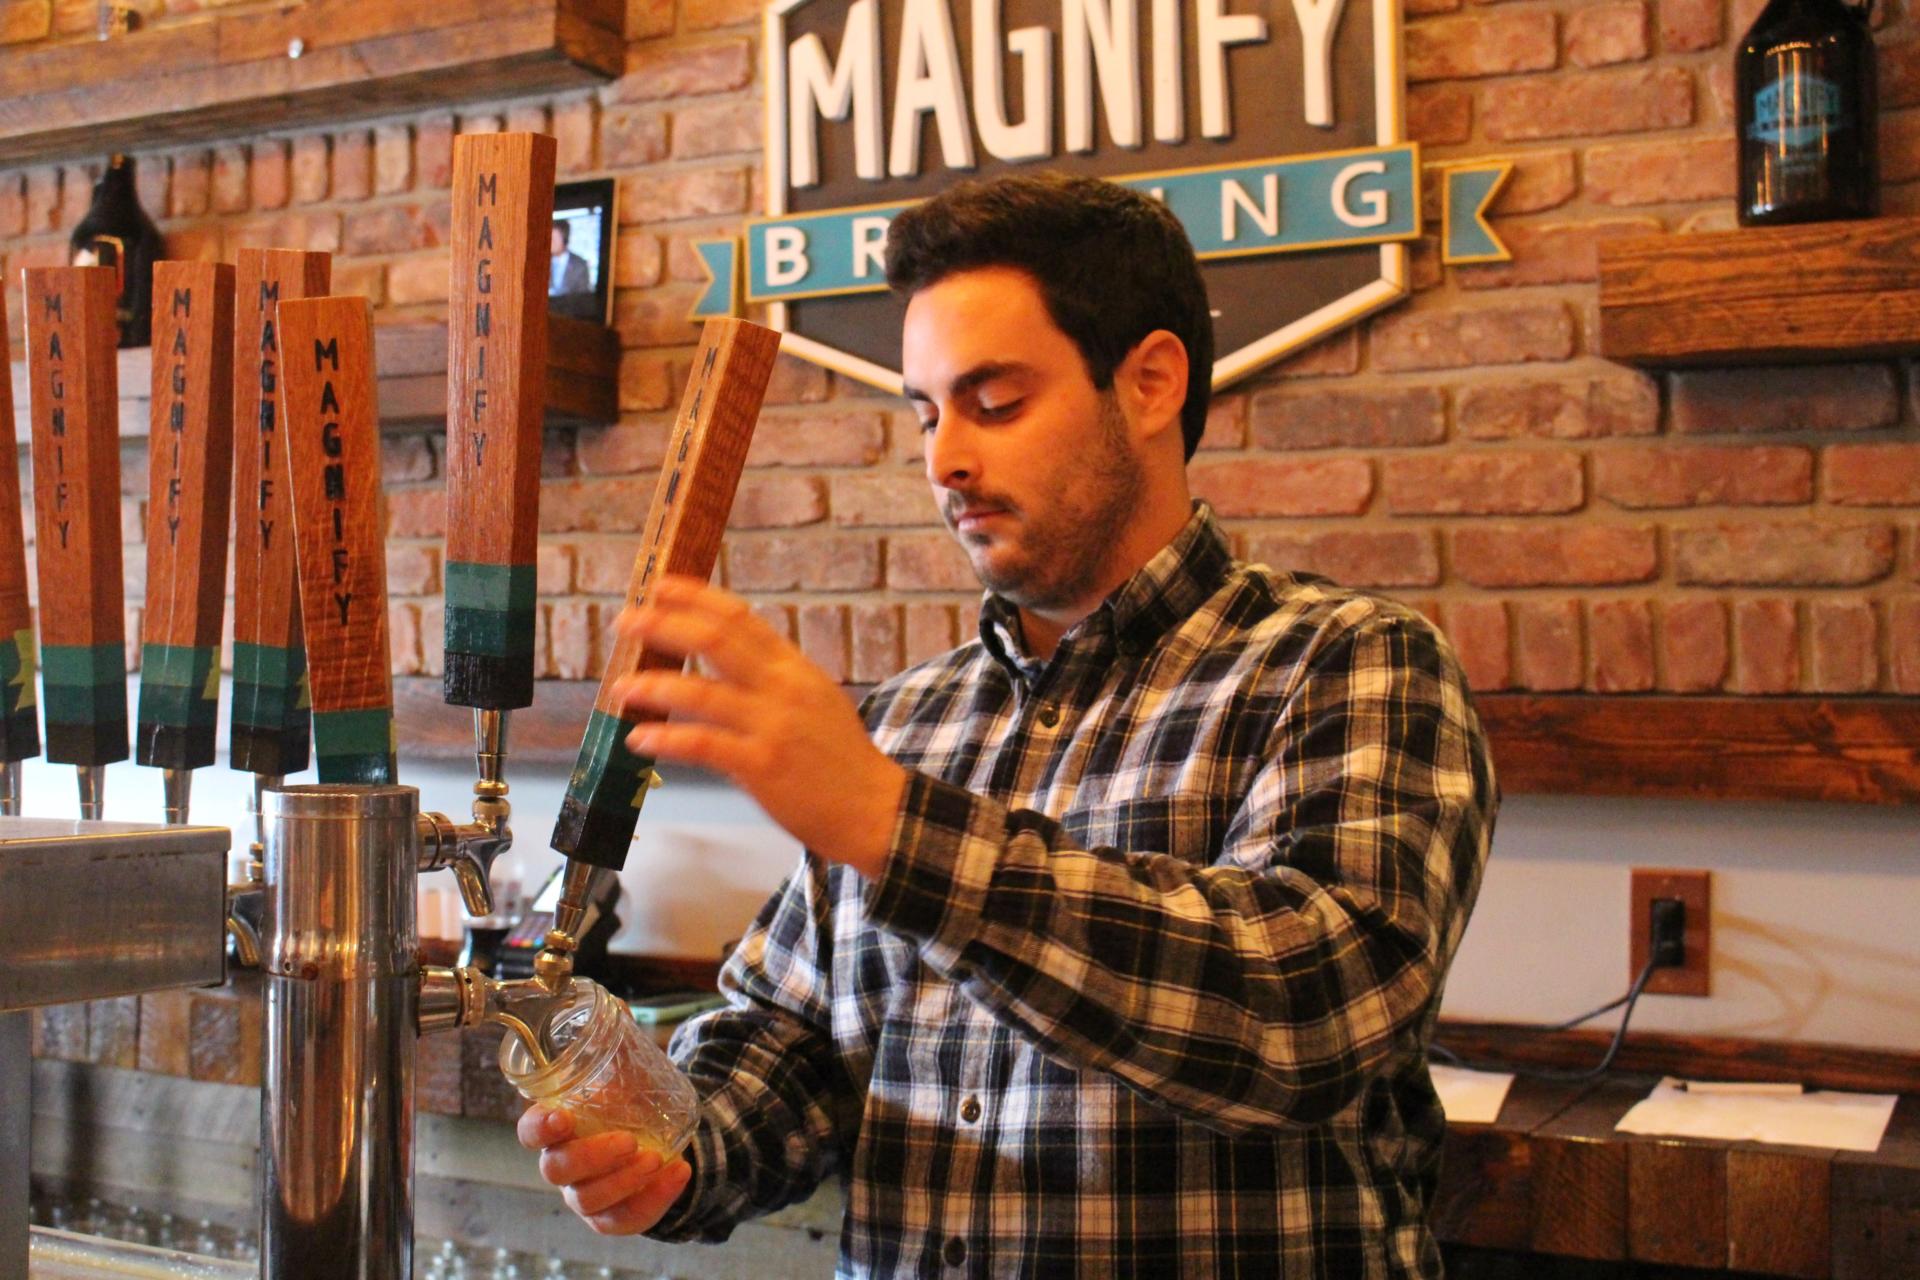 LOCAL: Day Drinking at Magnify Brewing Company